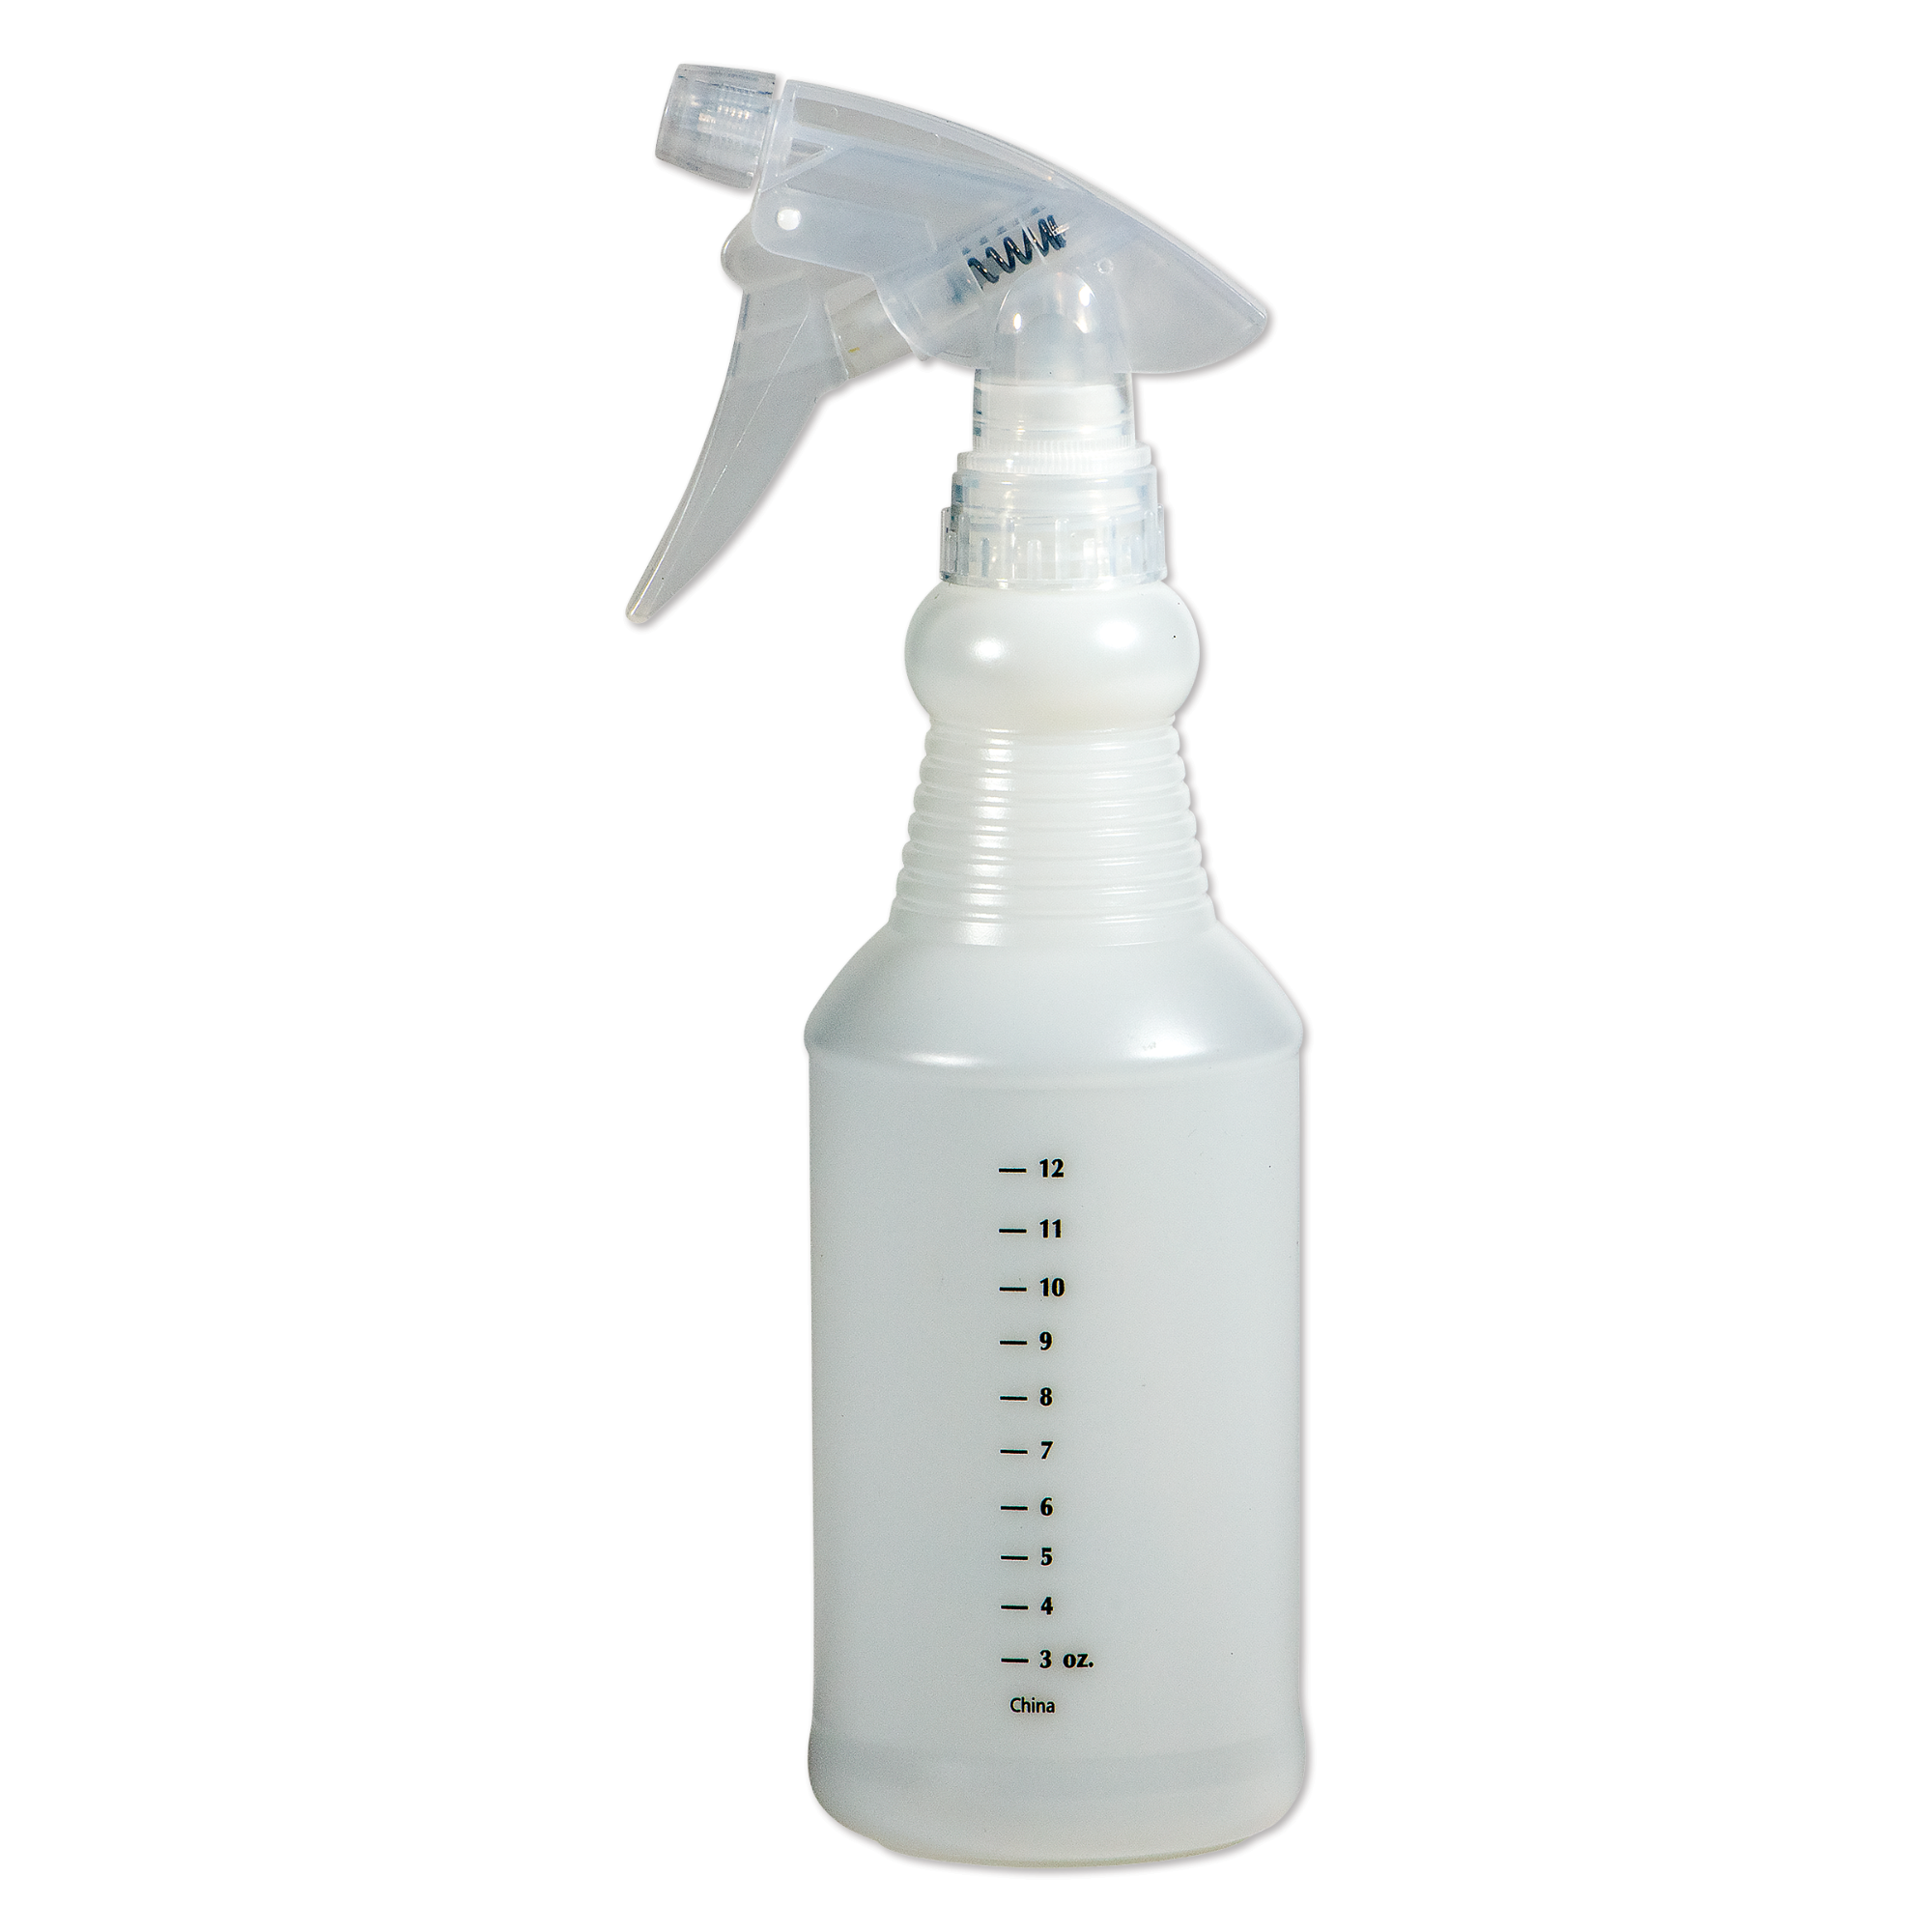 Super Spray Bottle with Measurement Scales, 16 oz.